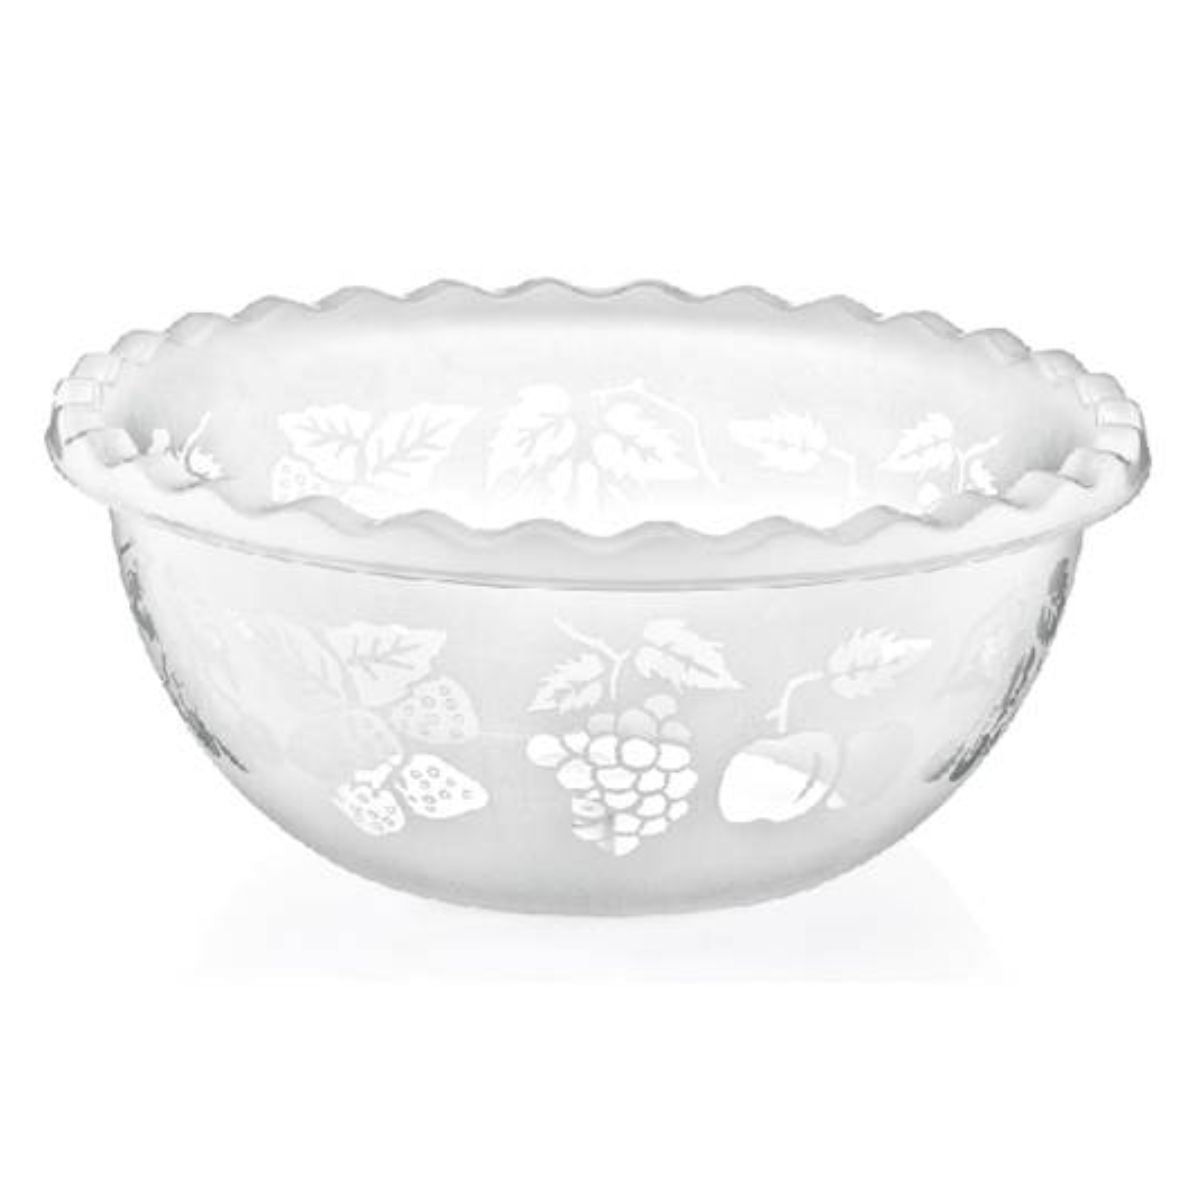 A Fruit Bowl Large - 1pcs with a pattern on it.